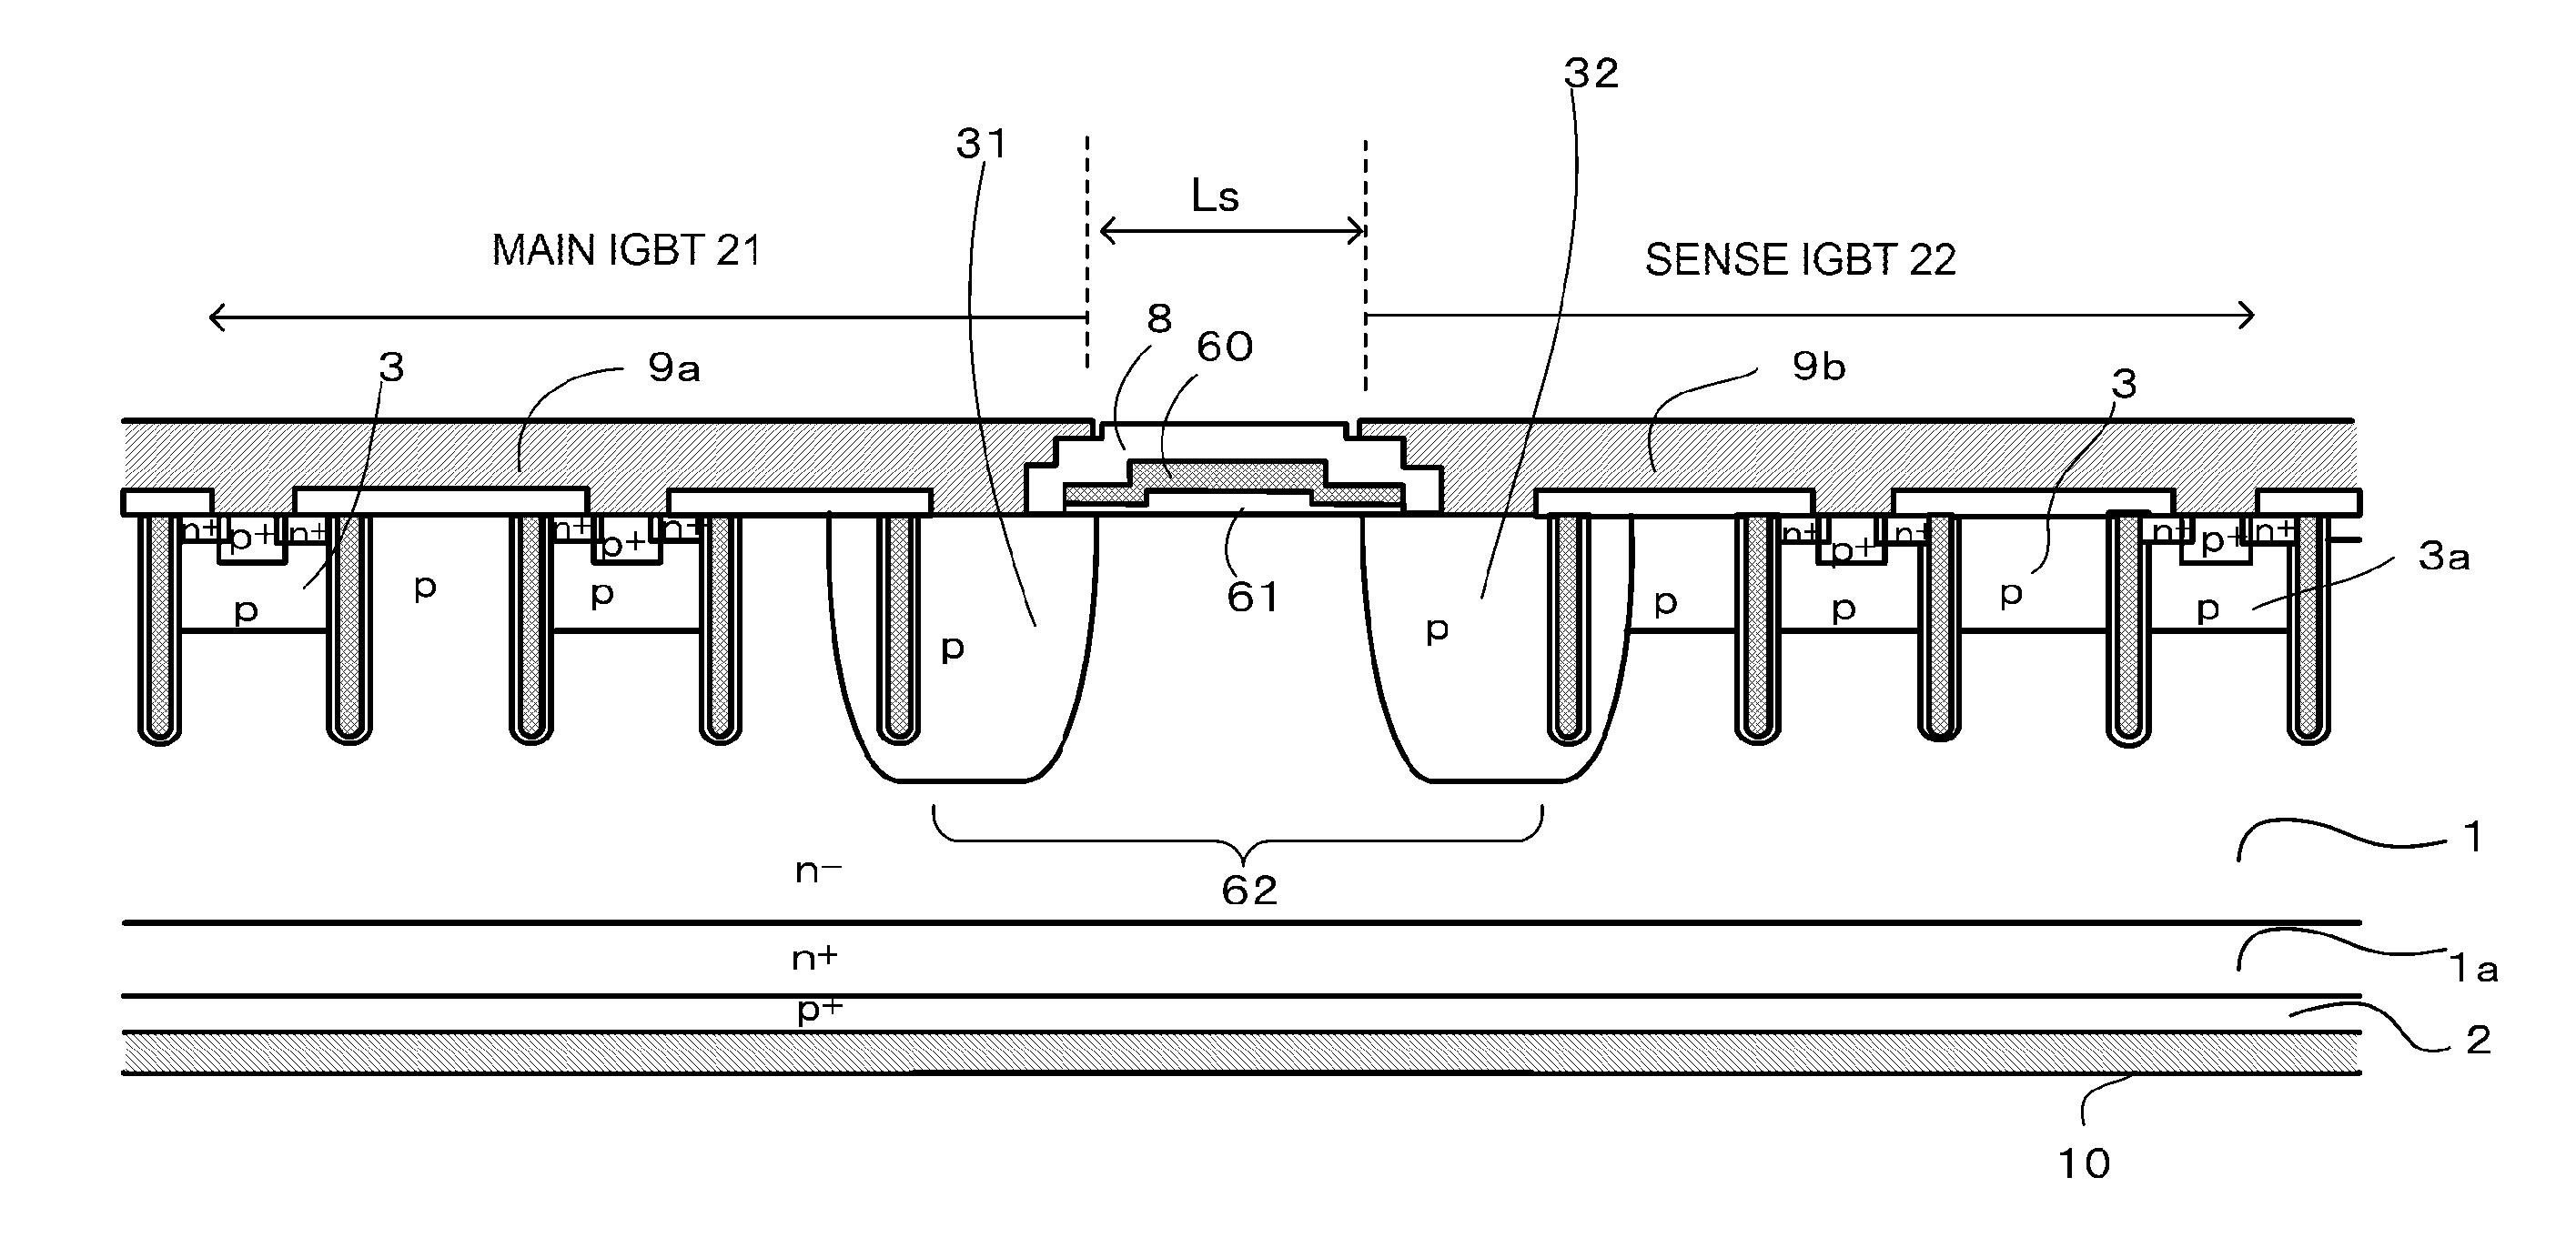 Trench mos semiconductor device